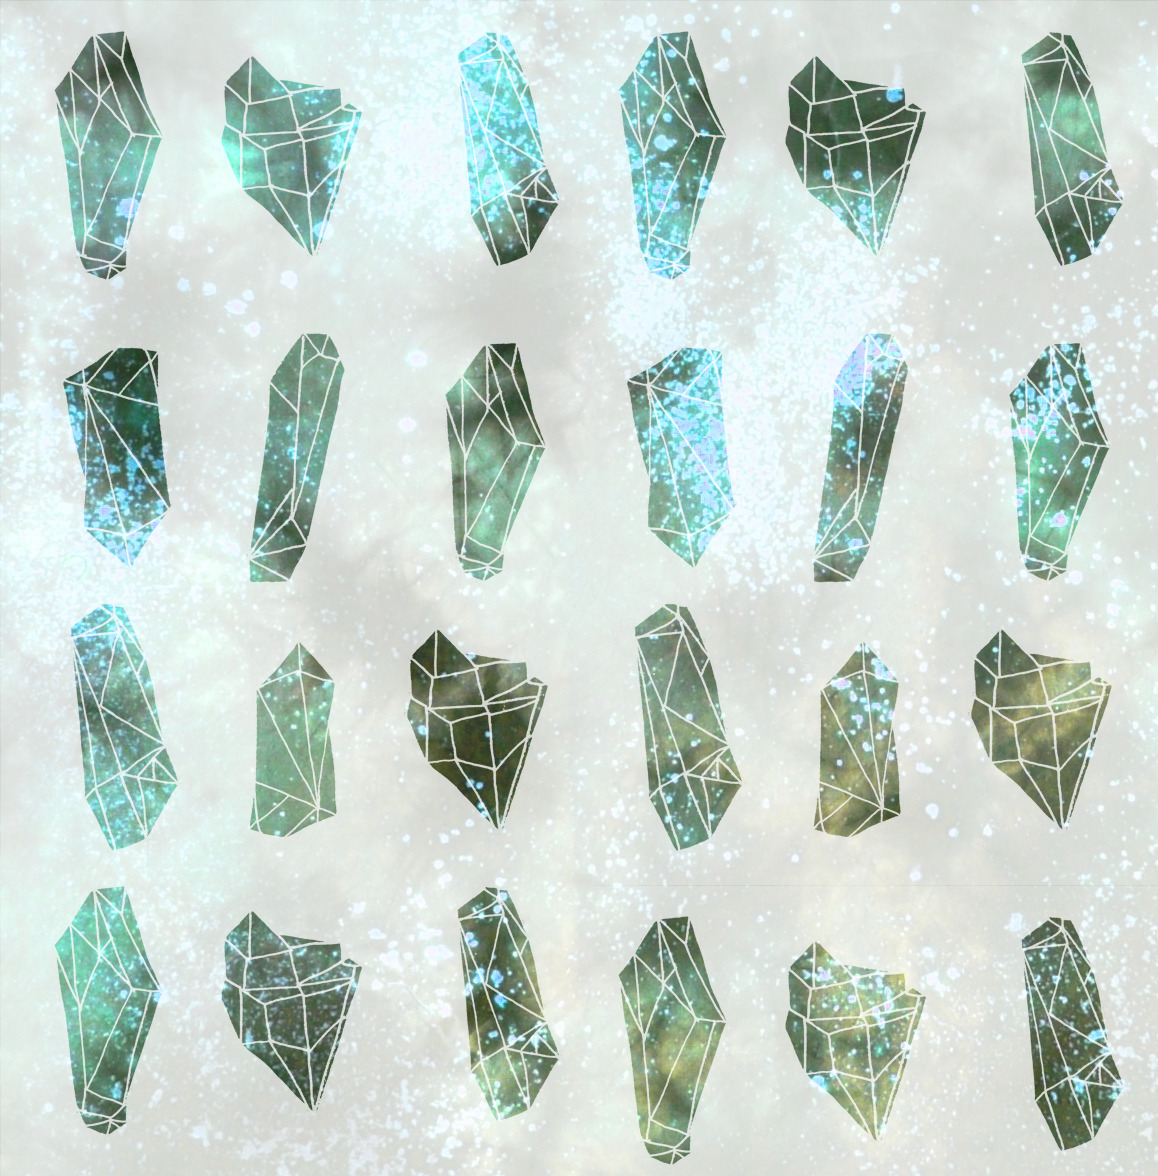 crystals tumblr backgrounds Tumblr Viewing  Gallery Crystals